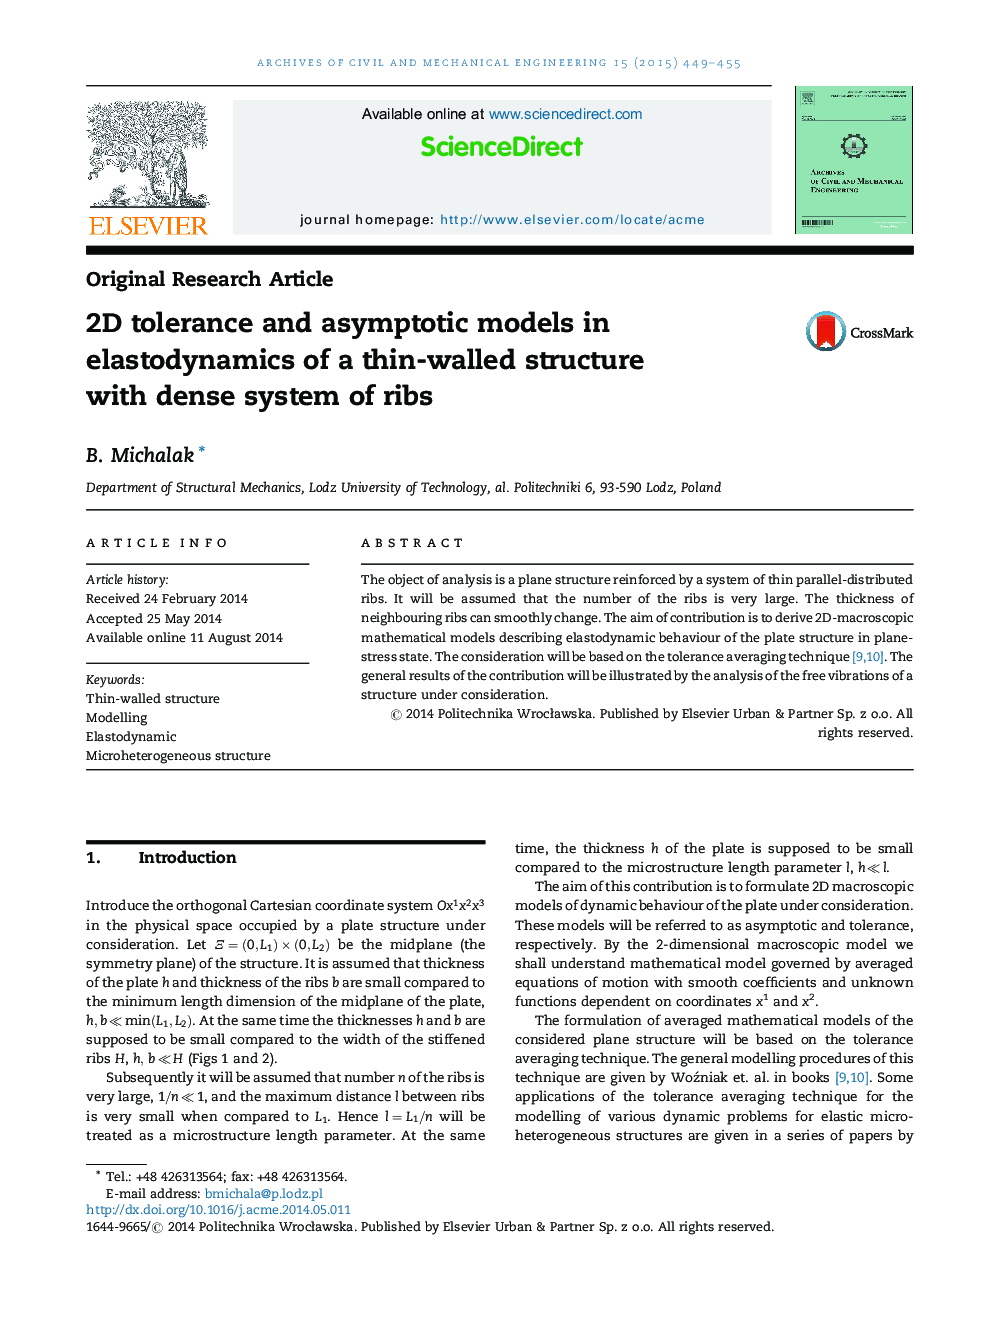 2D tolerance and asymptotic models in elastodynamics of a thin-walled structure with dense system of ribs